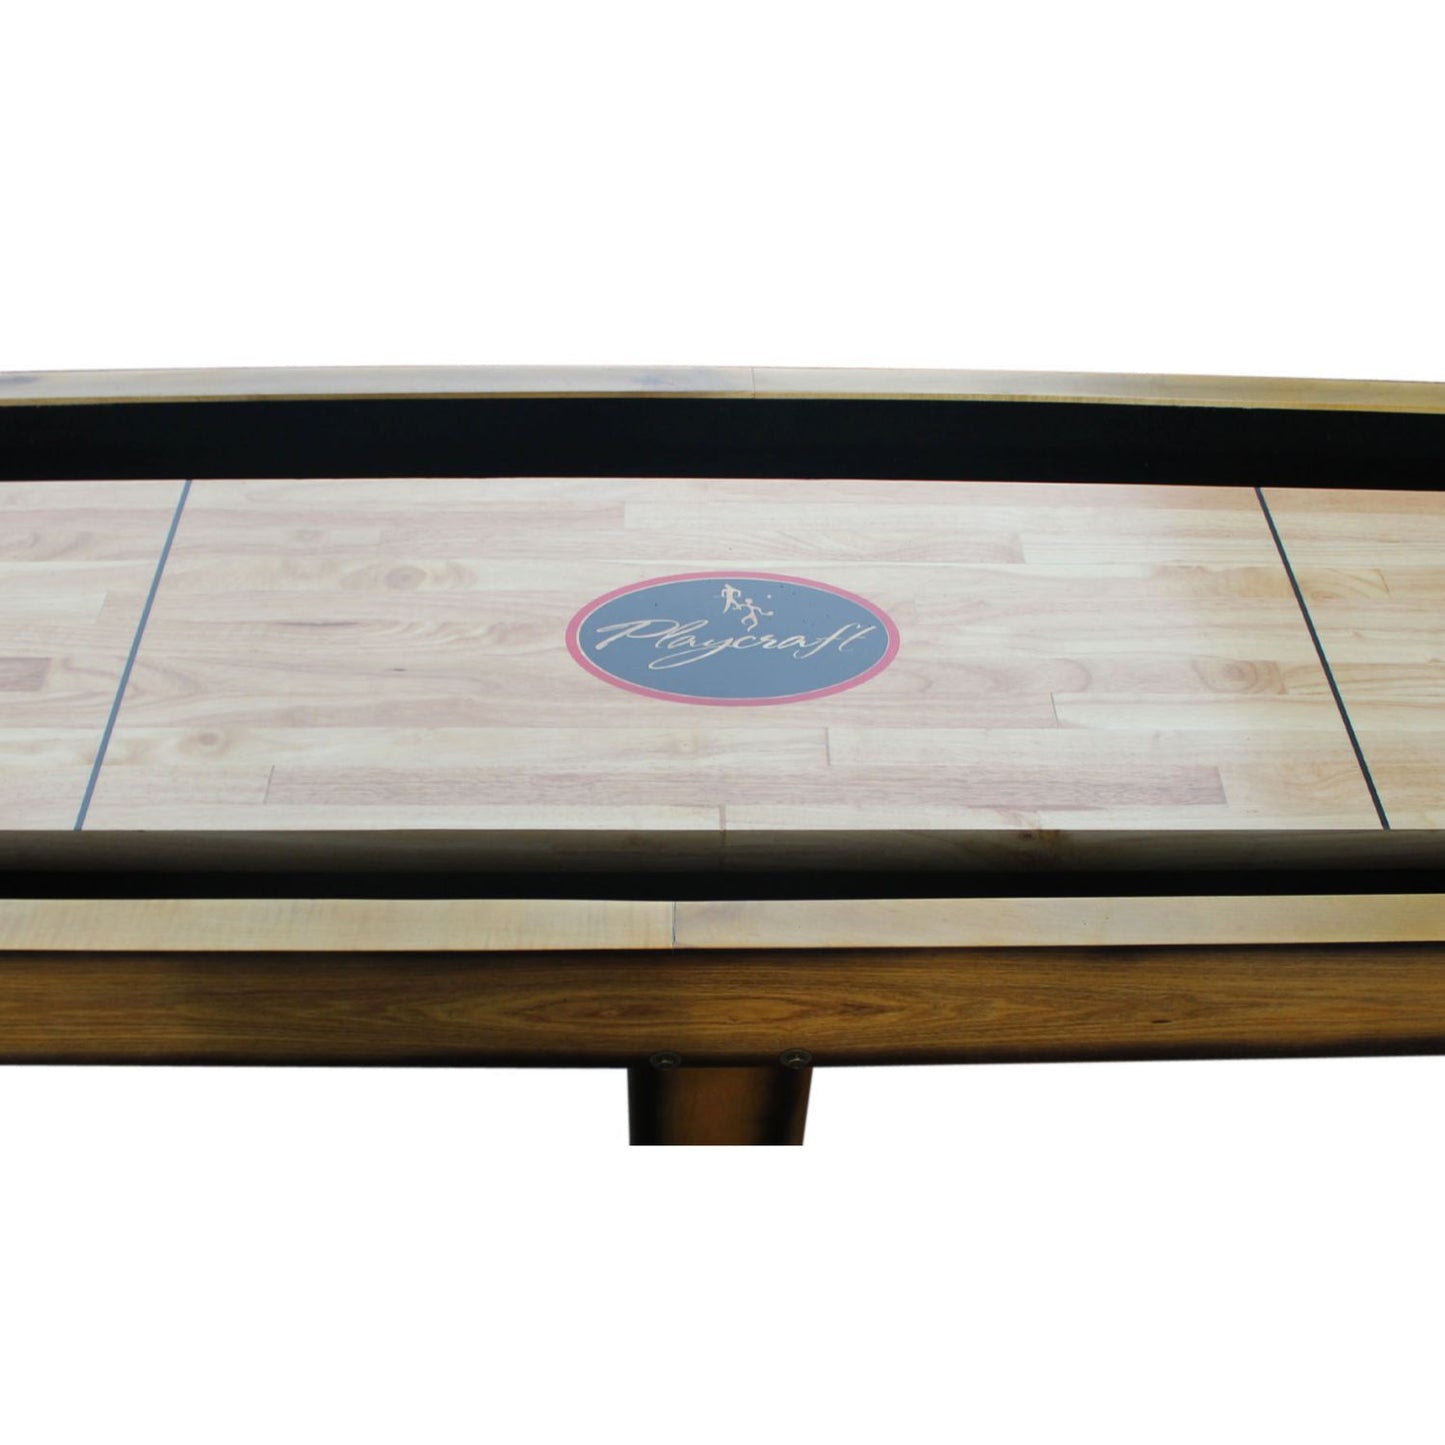 Playcraft Georgetown Shuffleboard Table with Playing Accessories - Gaming Blaze